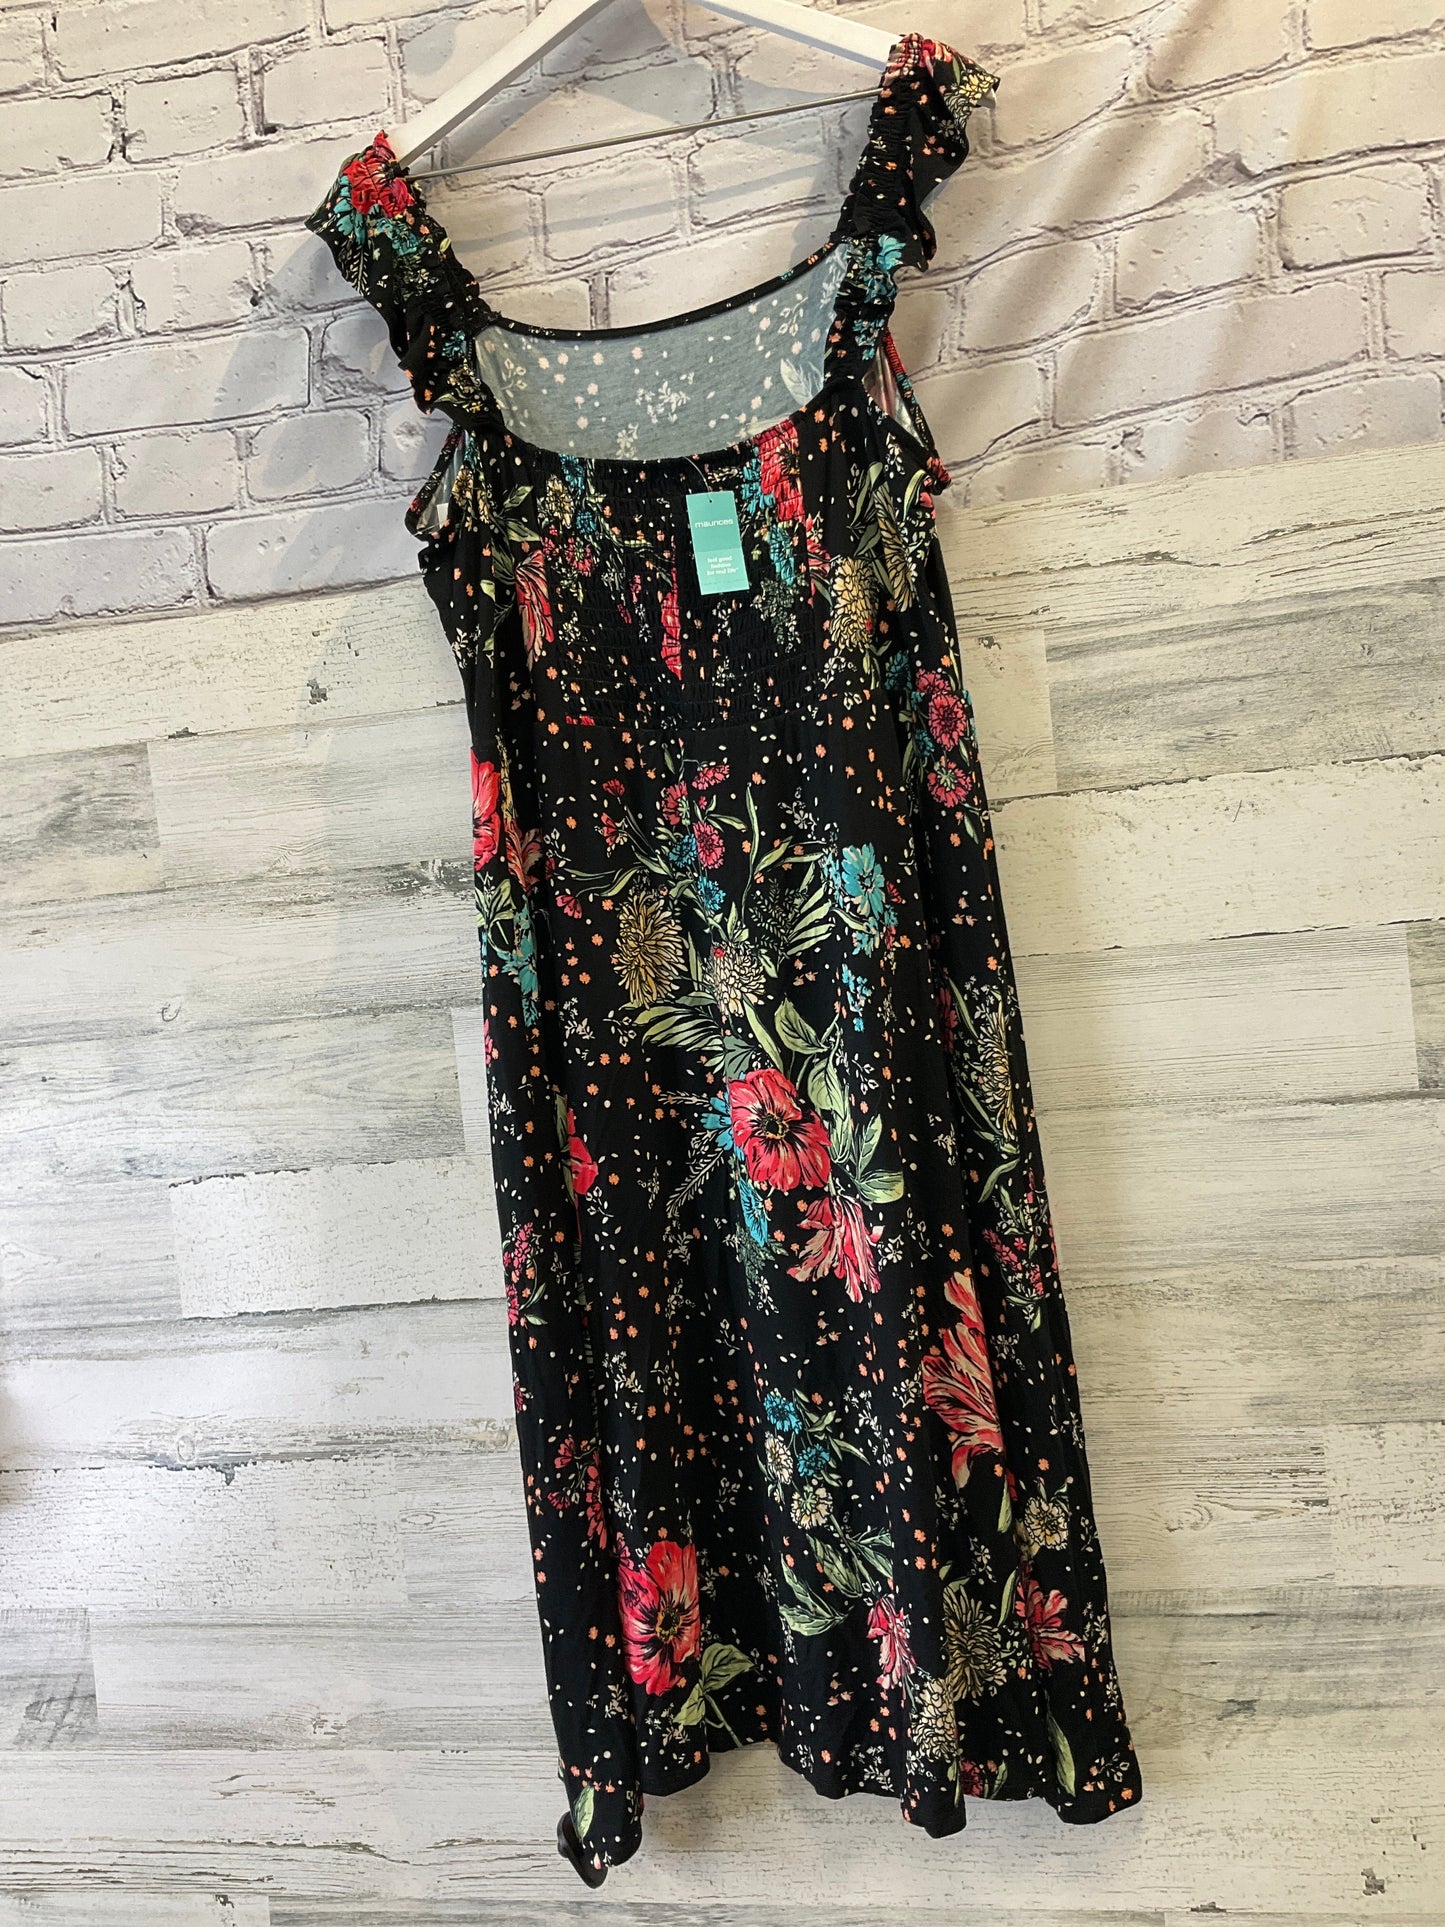 Floral Print Dress Casual Midi Maurices, Size Xl